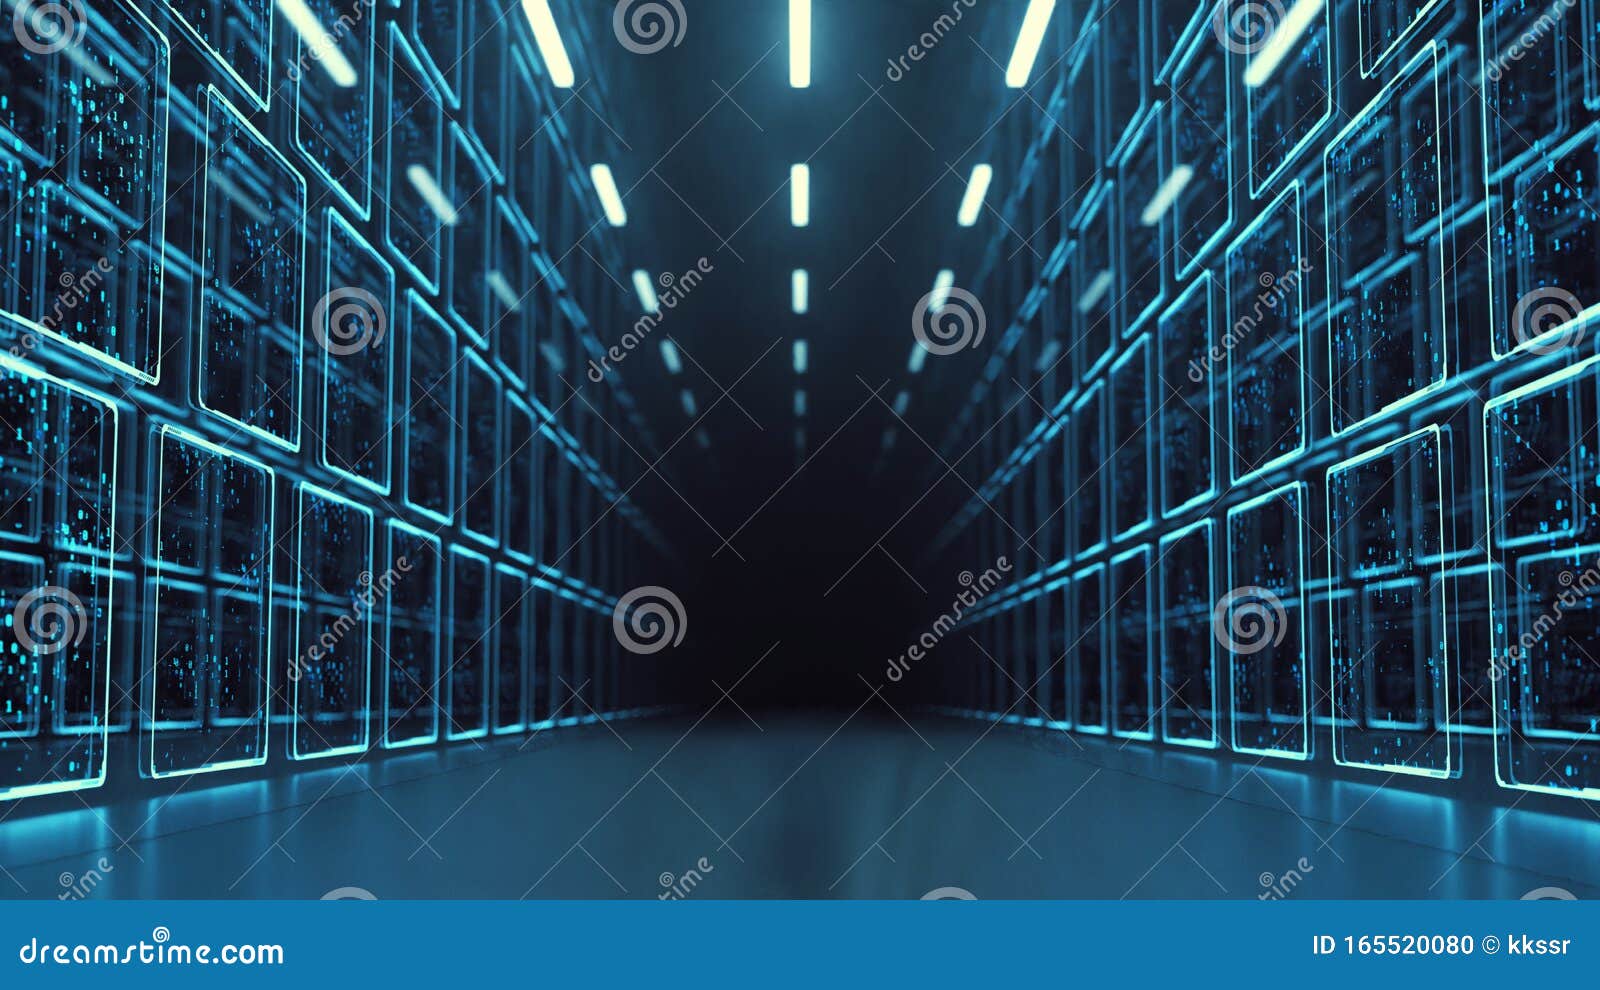 3d rendering of data center room with abstract data servers and glowing led binary, abstract network and ceiling lights.